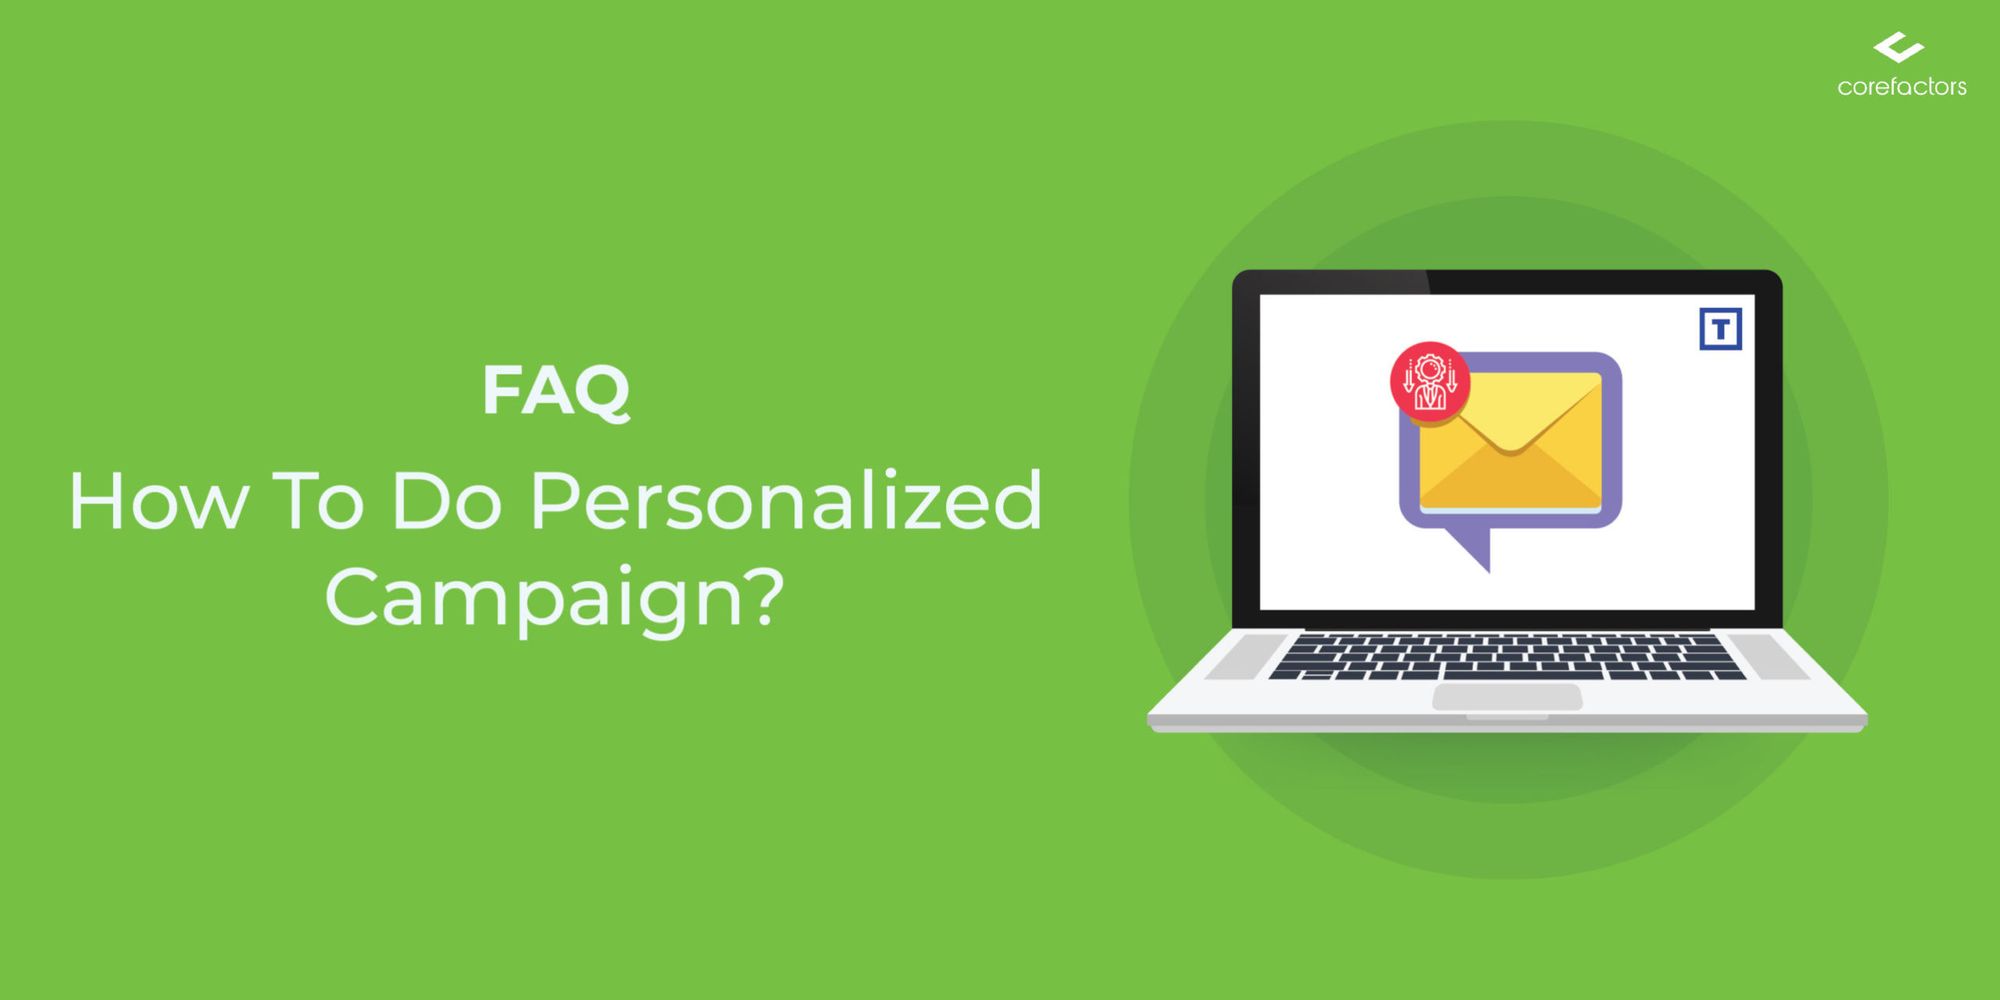 How to send Personalized Campaign?